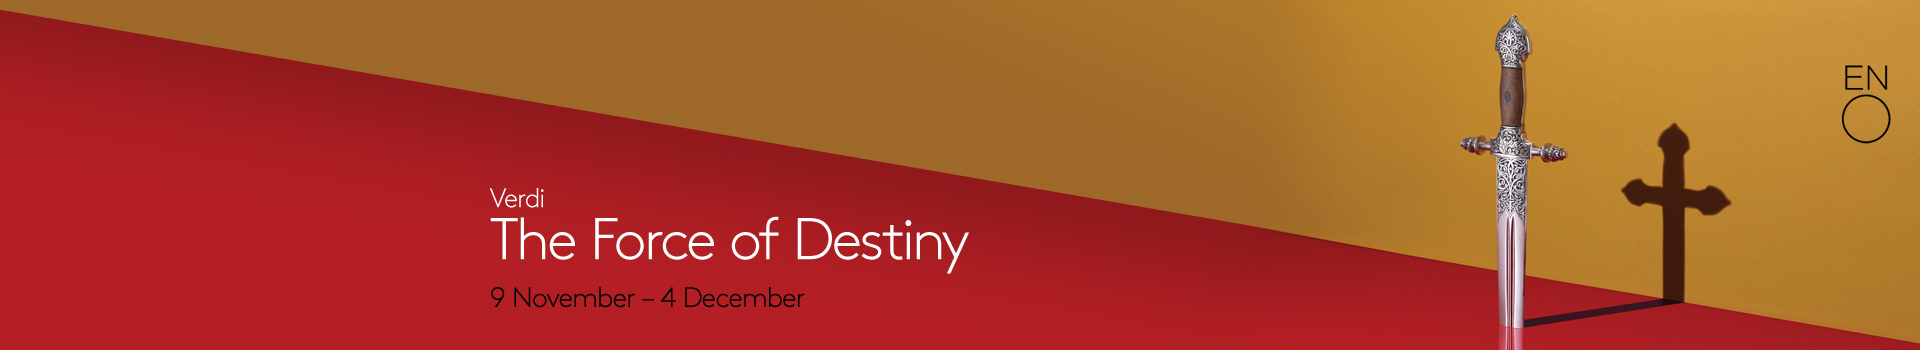 The Force Of Destiny banner image